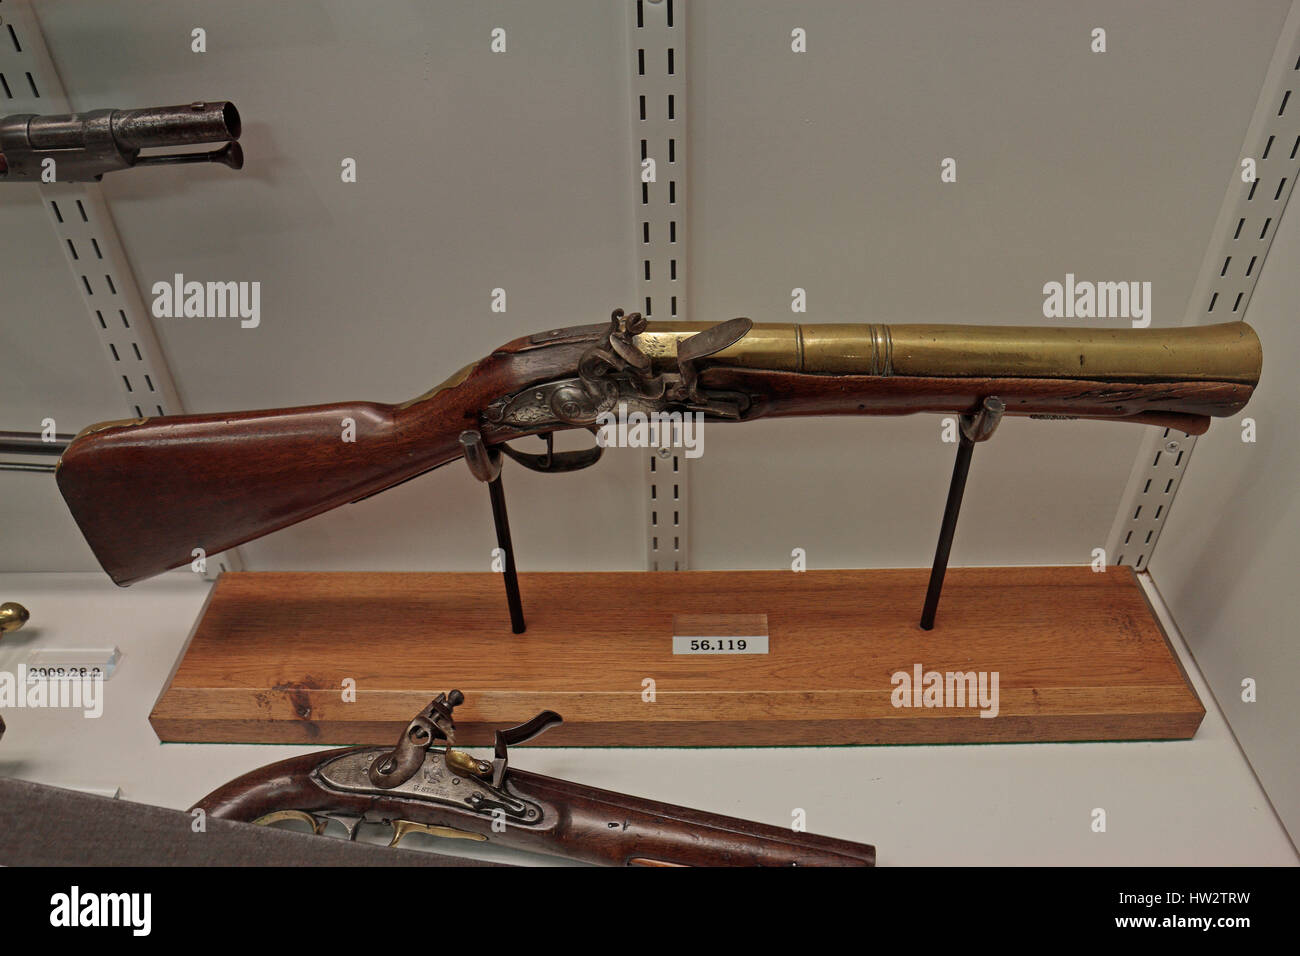 A blunderbuss English gun on display in the Flynt Center of Early New England Life, Historic Deerfield, Franklin County, Ma, United States. Stock Photo